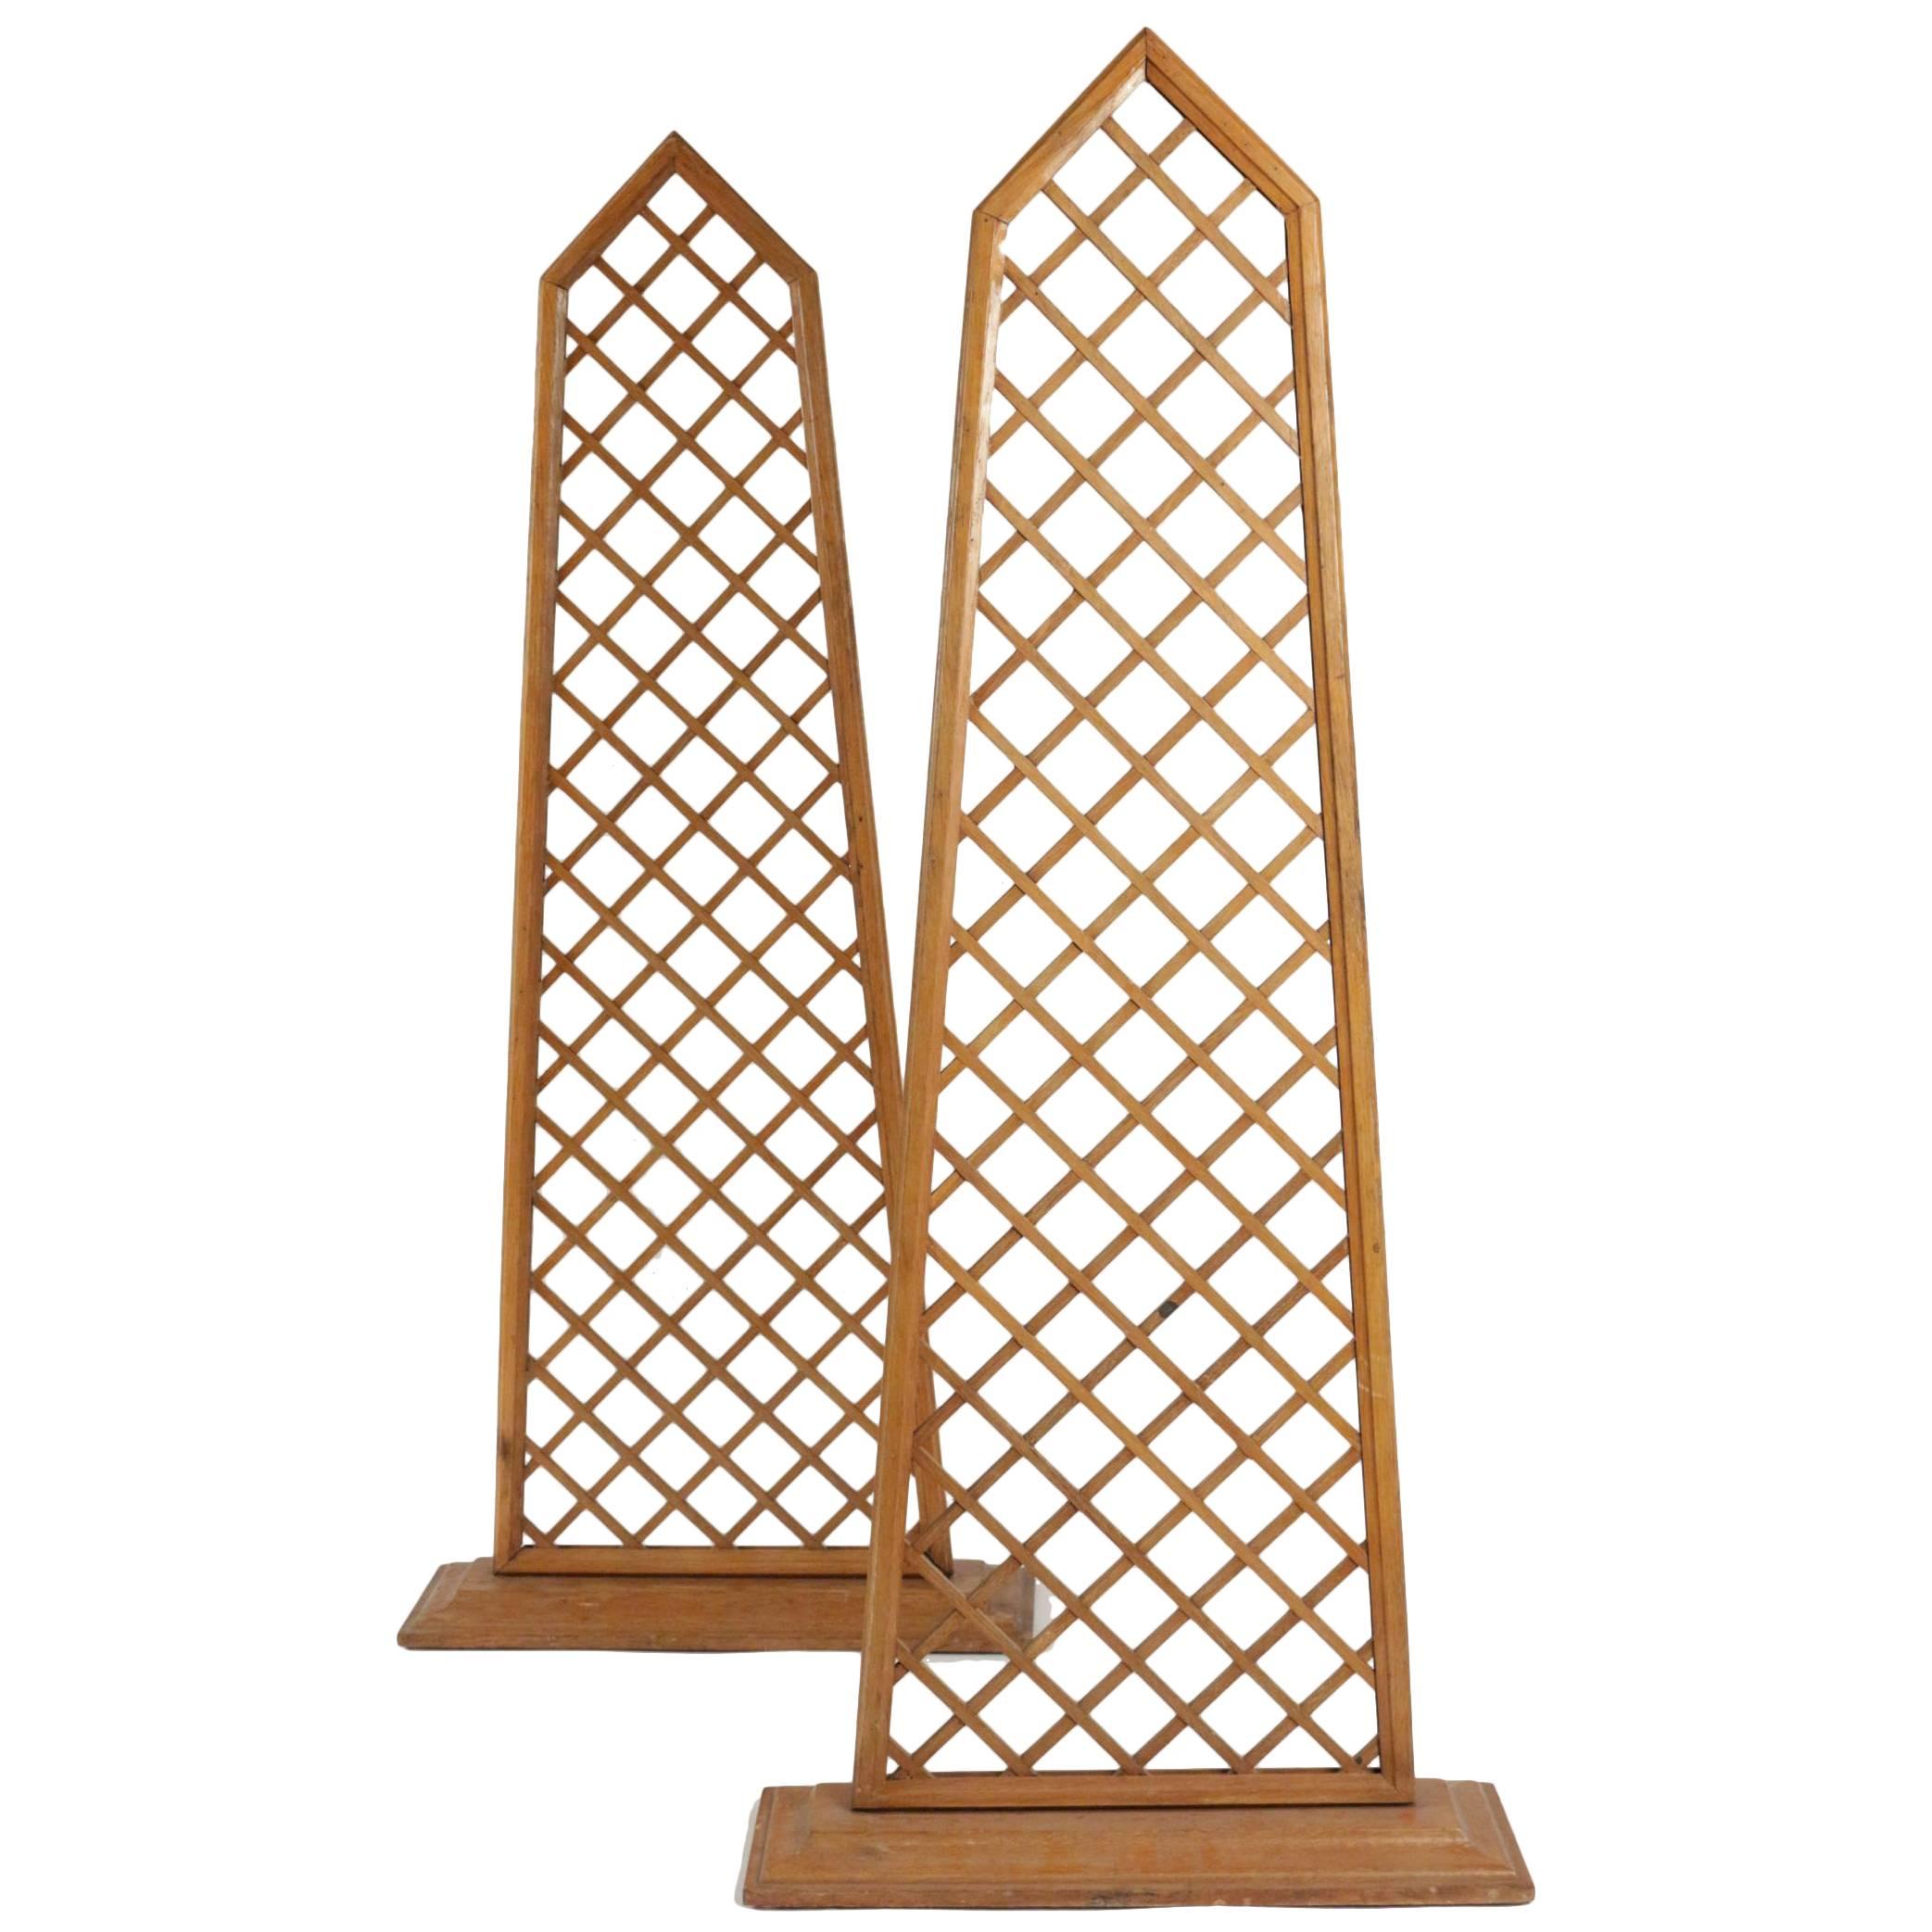 Pair of Wall Screens in Wood, circa 1970-1980 from Maison Siegel